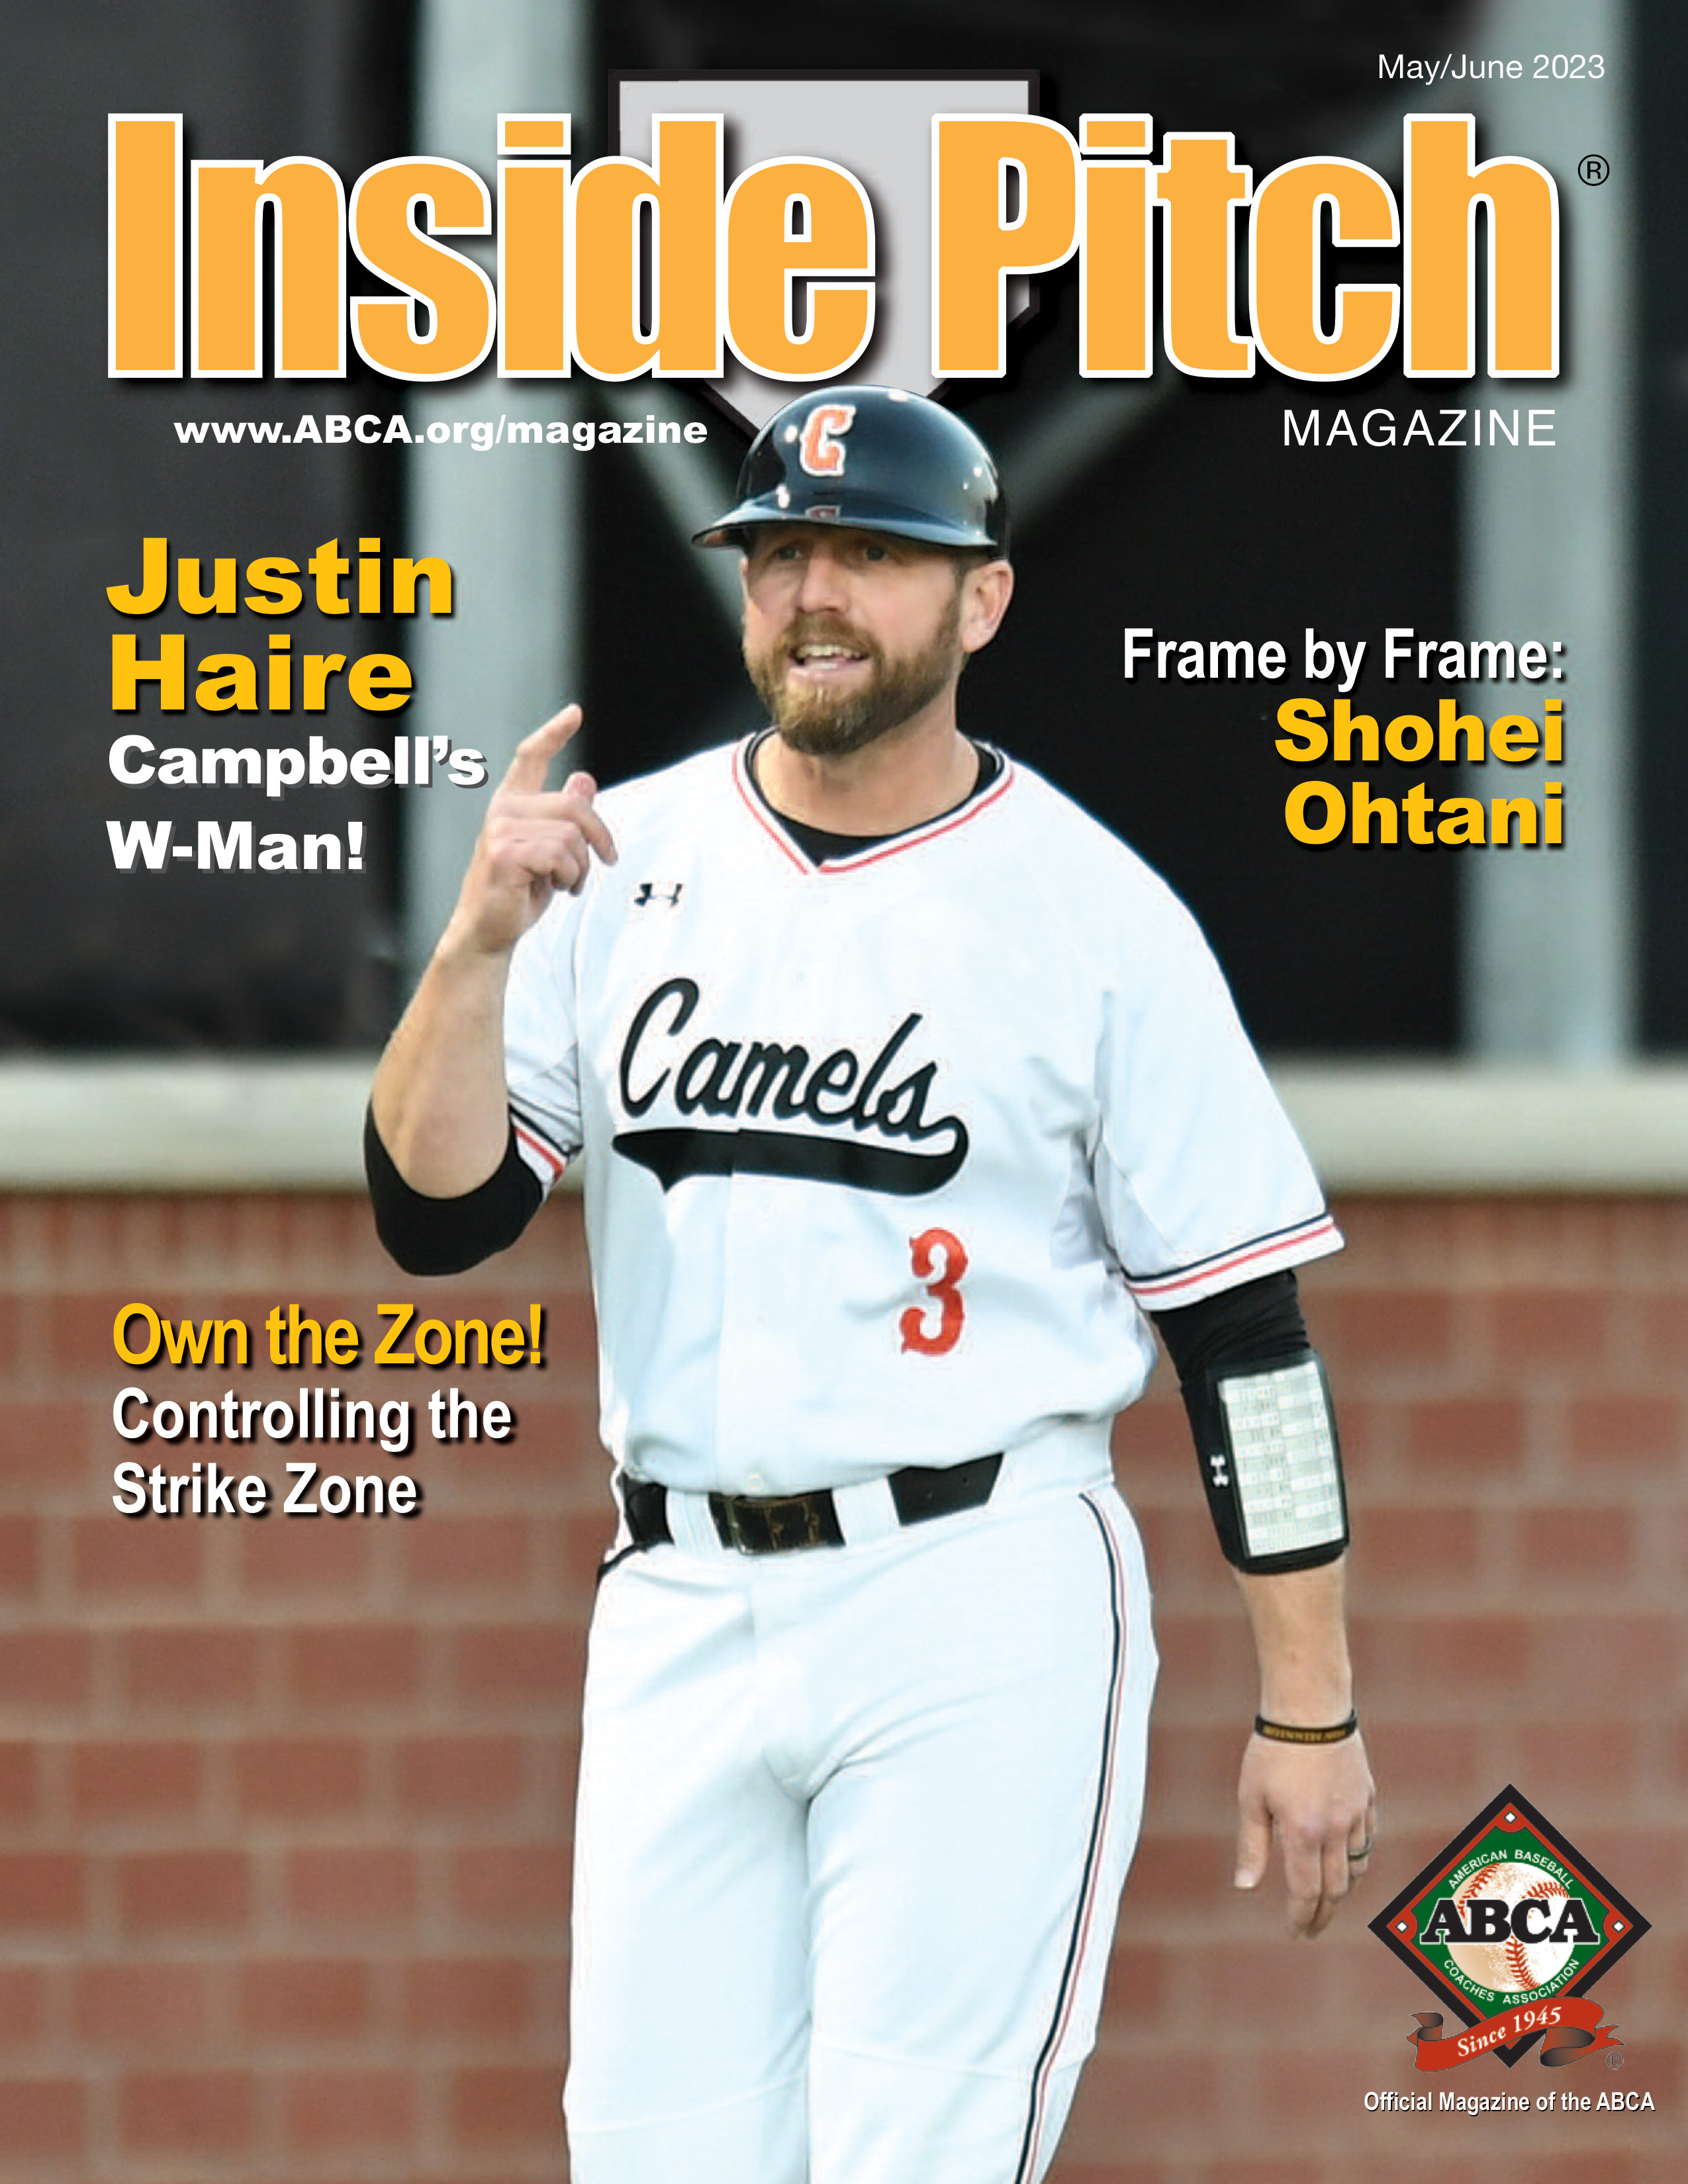 Inside Pitch Magazine Cover with Justin Haire